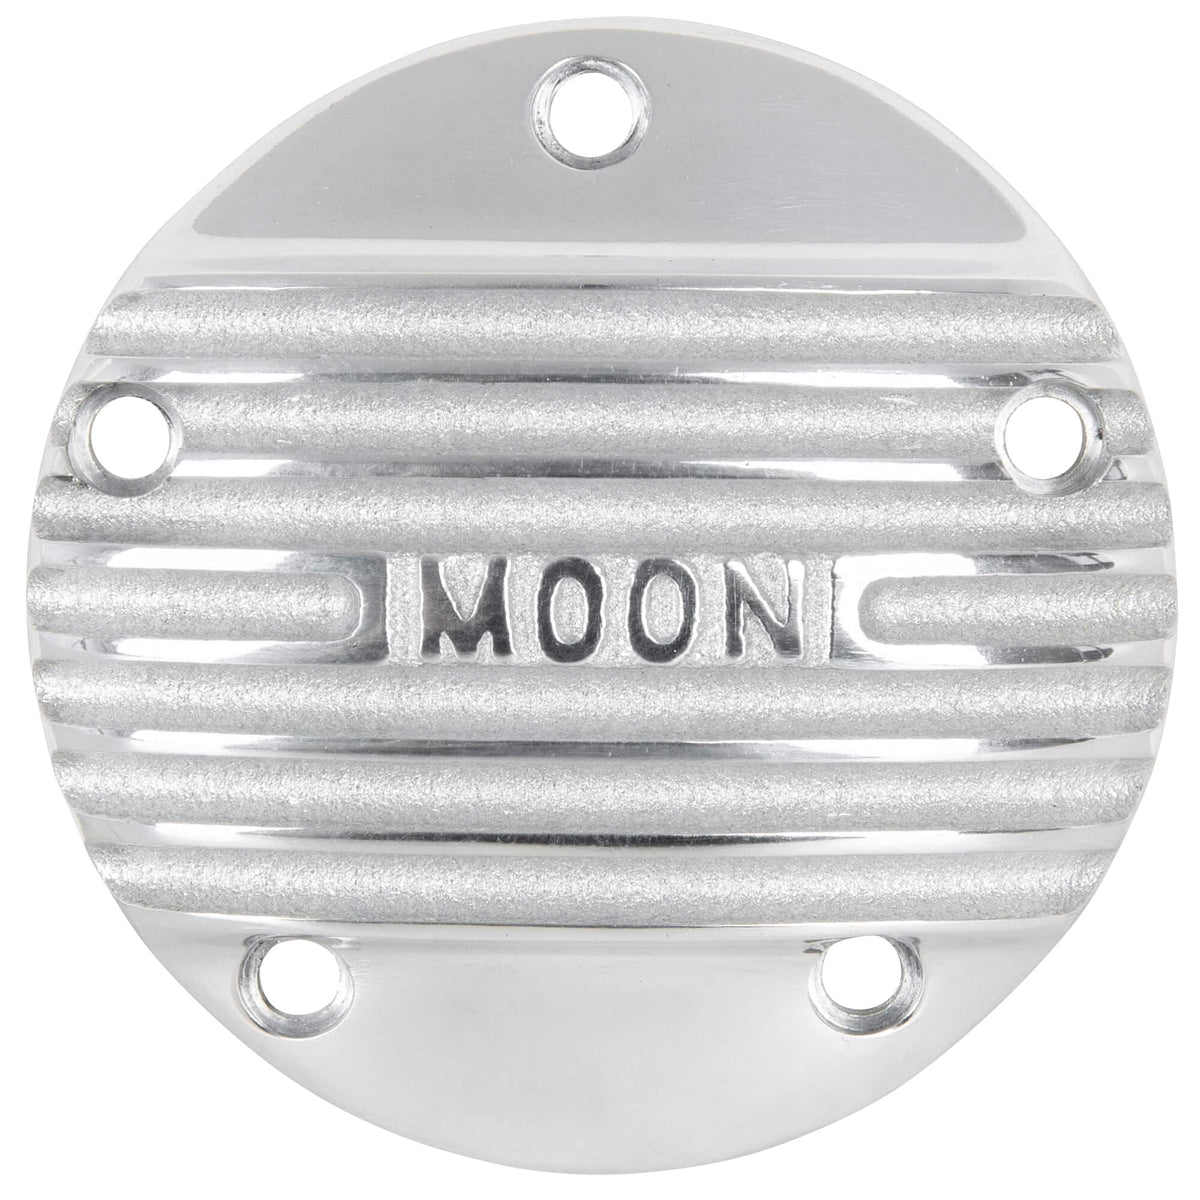 Mooneyes Finned Points Cover for Harley-Davdison 1999 & Up Twin Cam